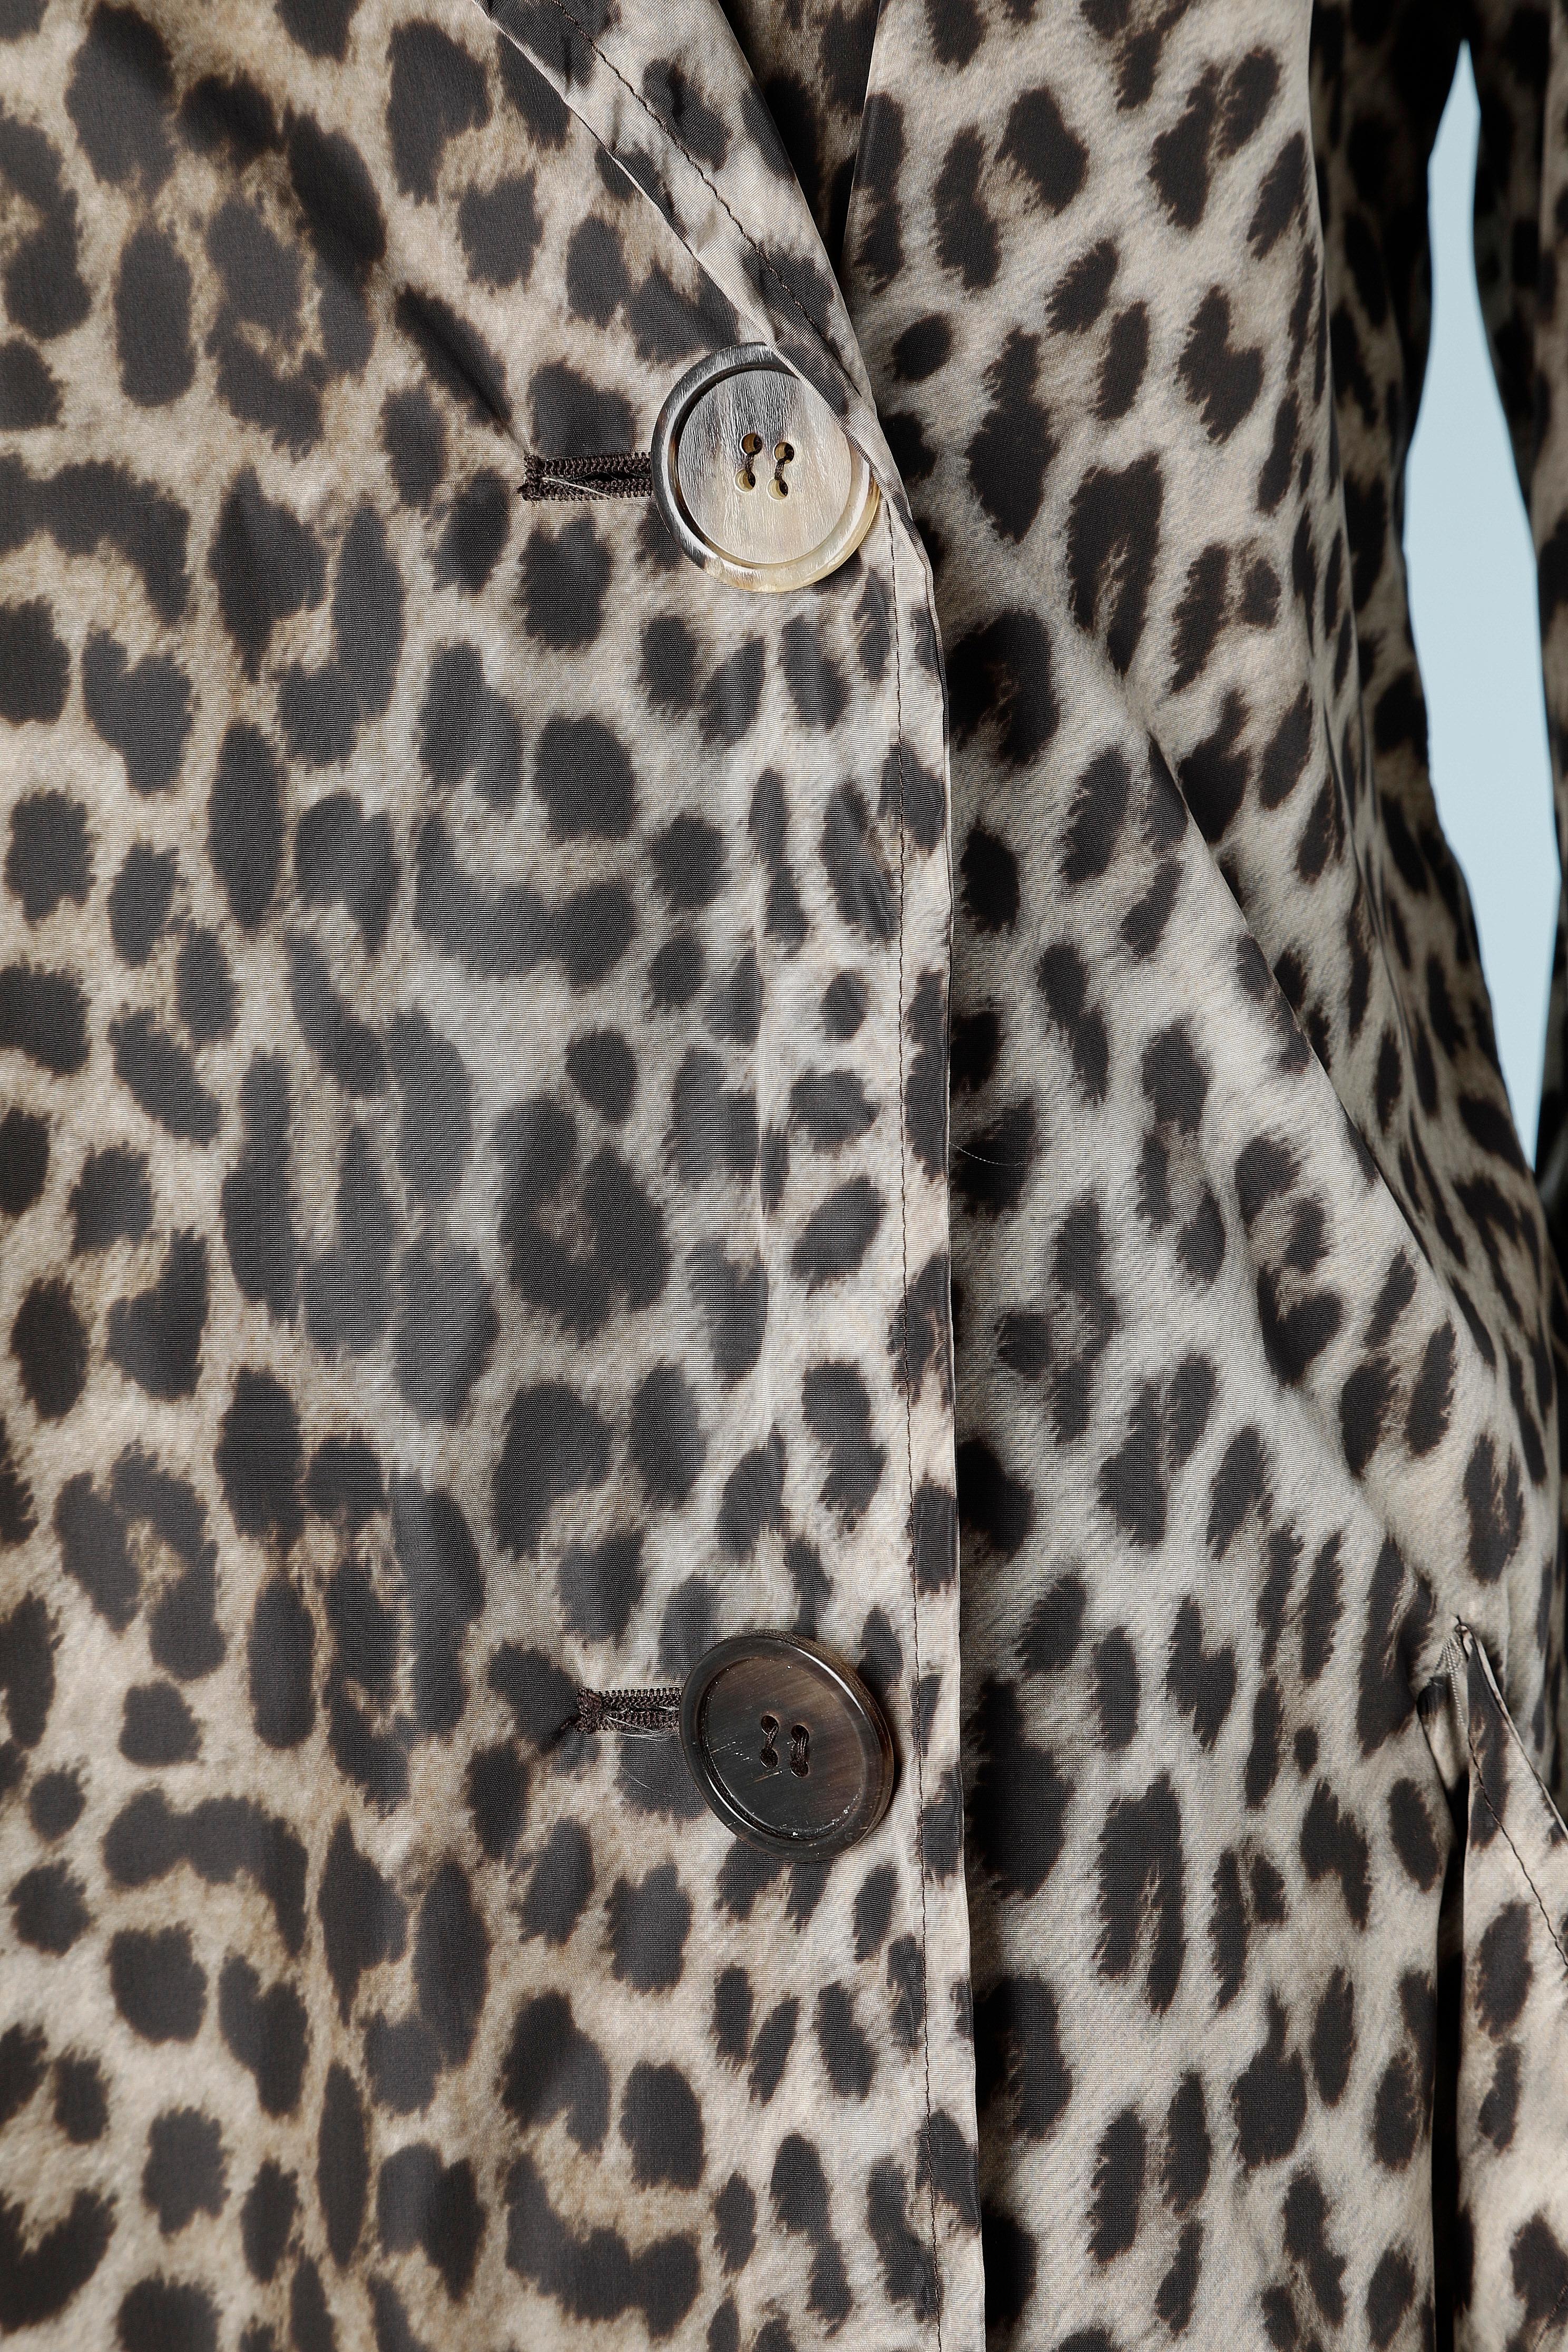 Nylon leopard printed double-breasted trench-coat Lanvin by Alber Elbaz 2010 In Excellent Condition For Sale In Saint-Ouen-Sur-Seine, FR